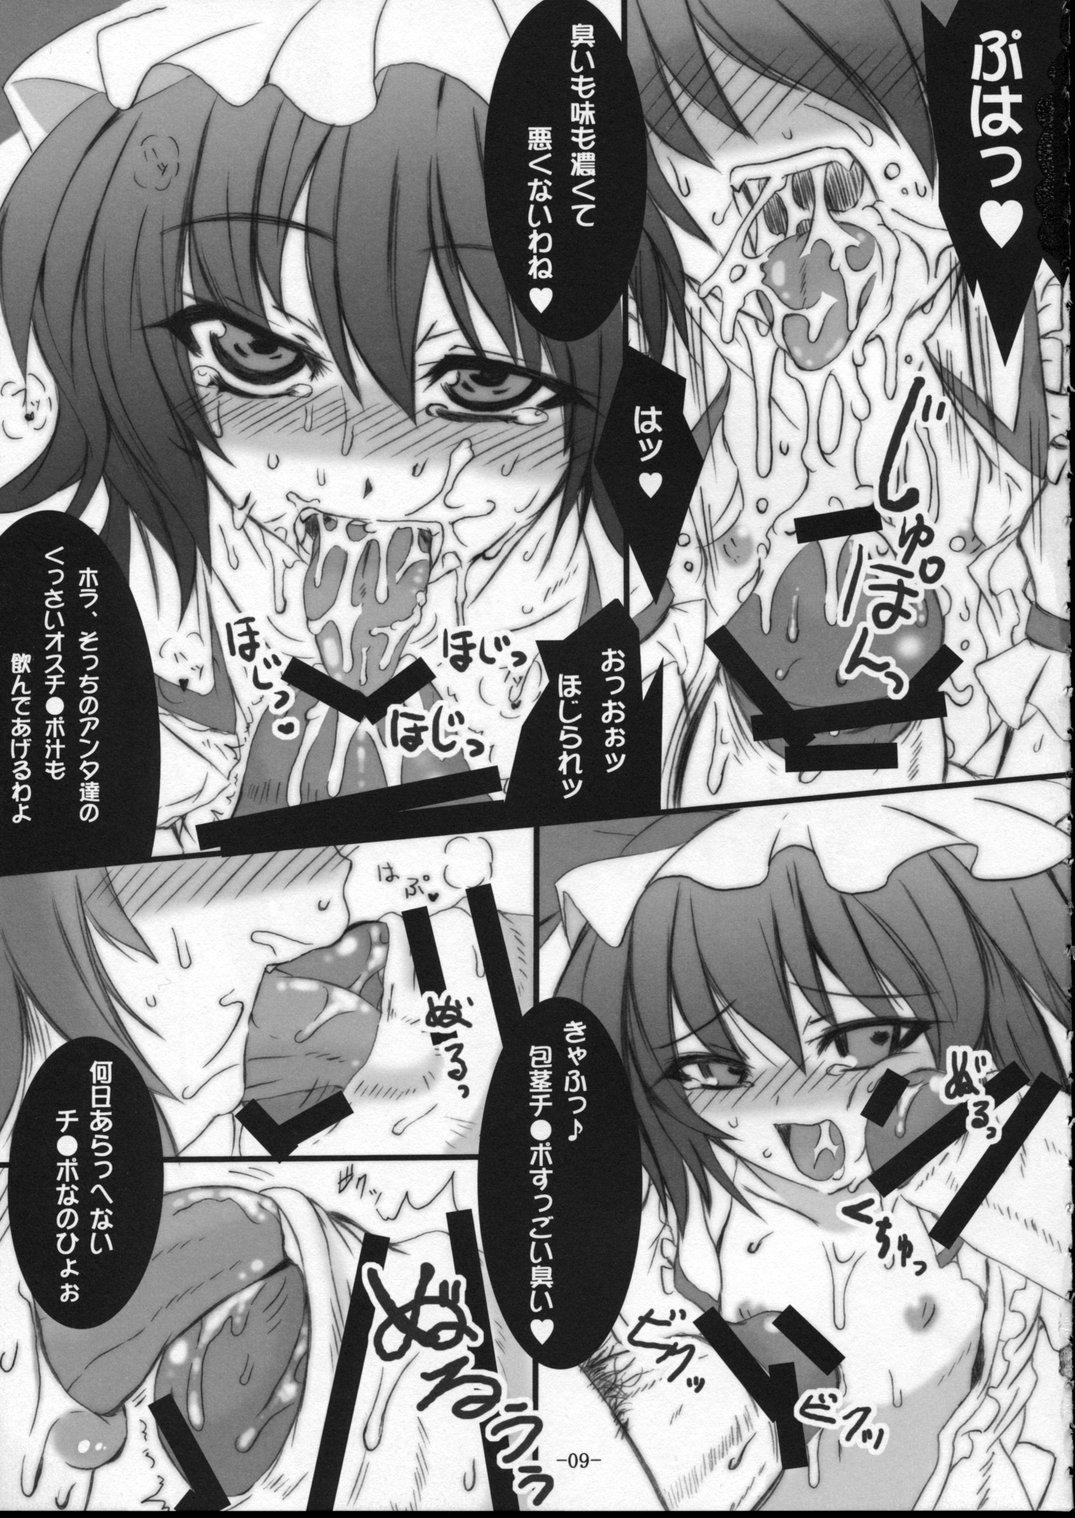 Asses INVADED SCARLET - Touhou project Exibicionismo - Page 8